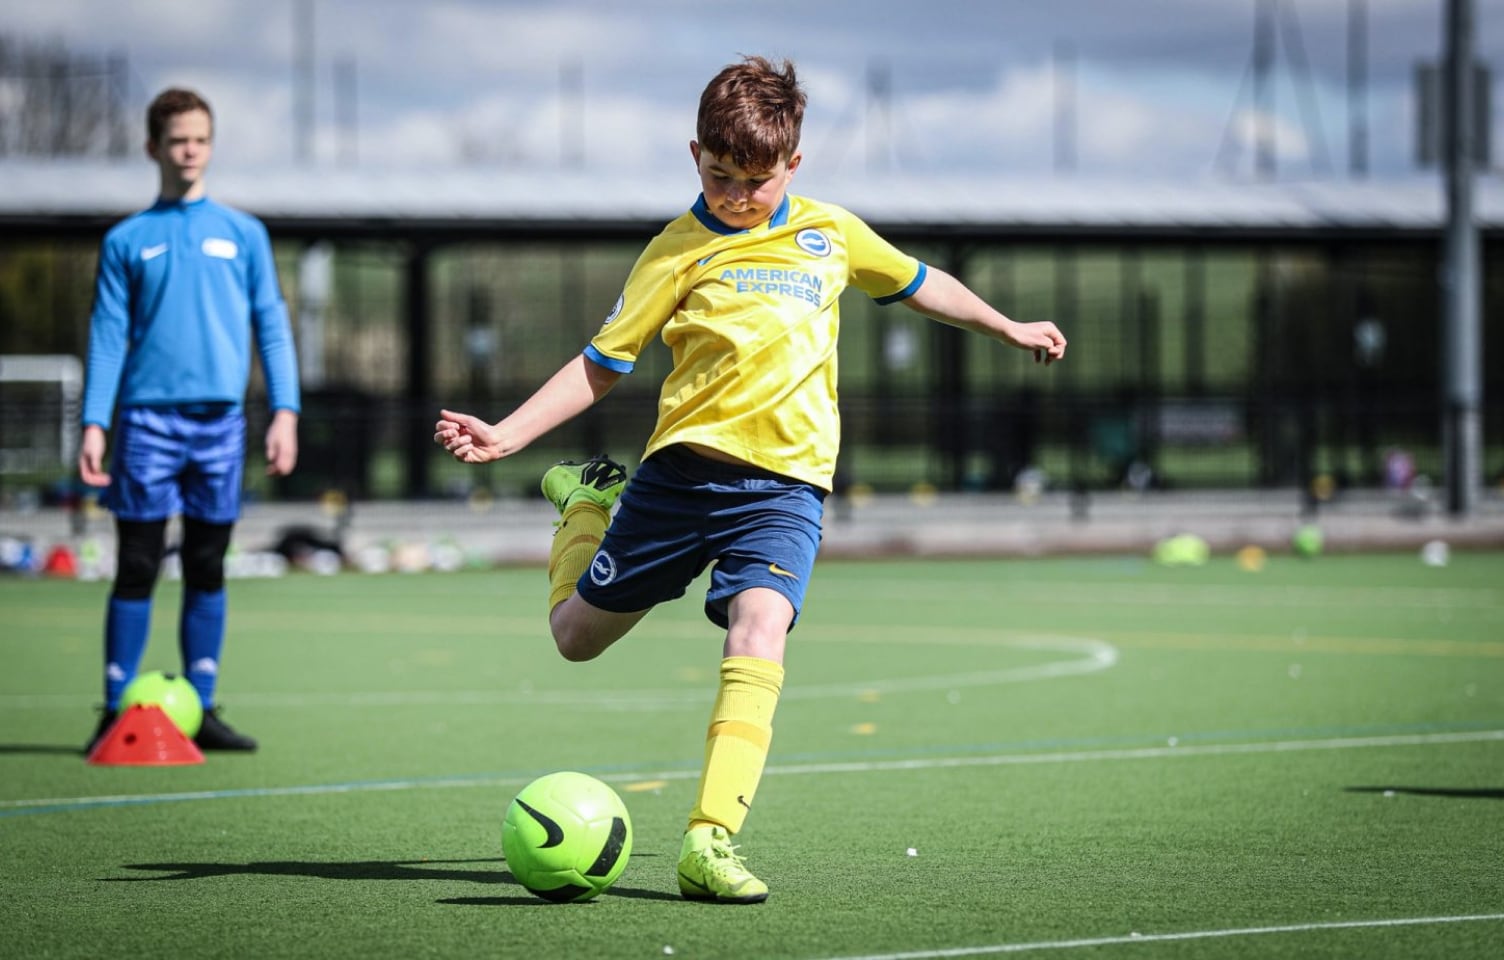 Giving Finley an opportunity through autism football sessions